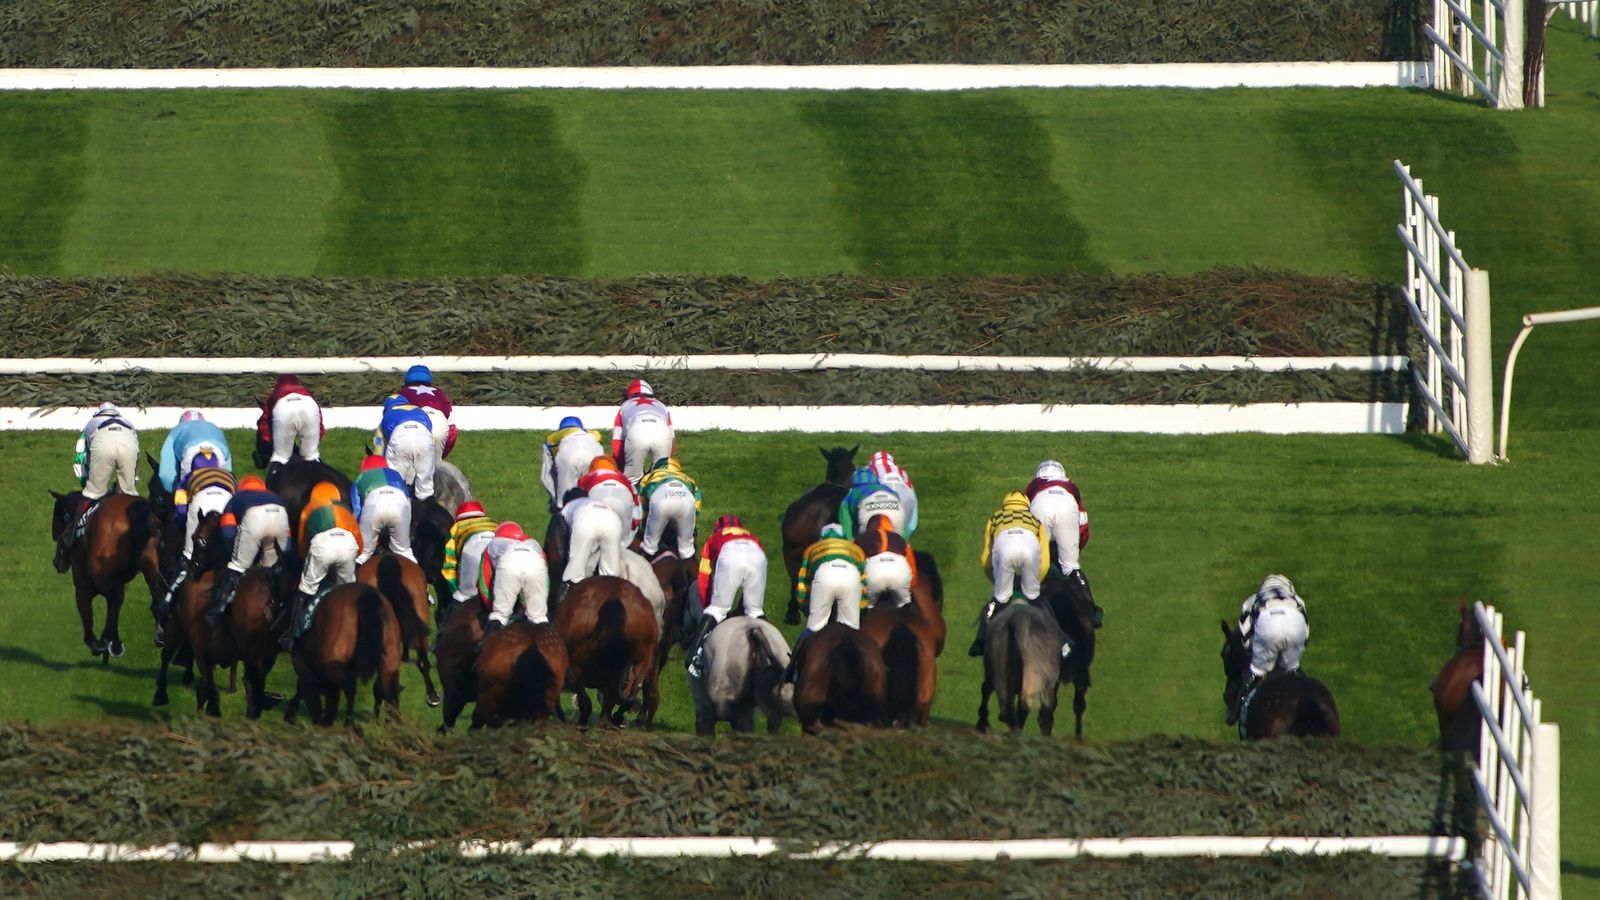 Grand National start time Aintree spectacle moved to 4pm as Corach